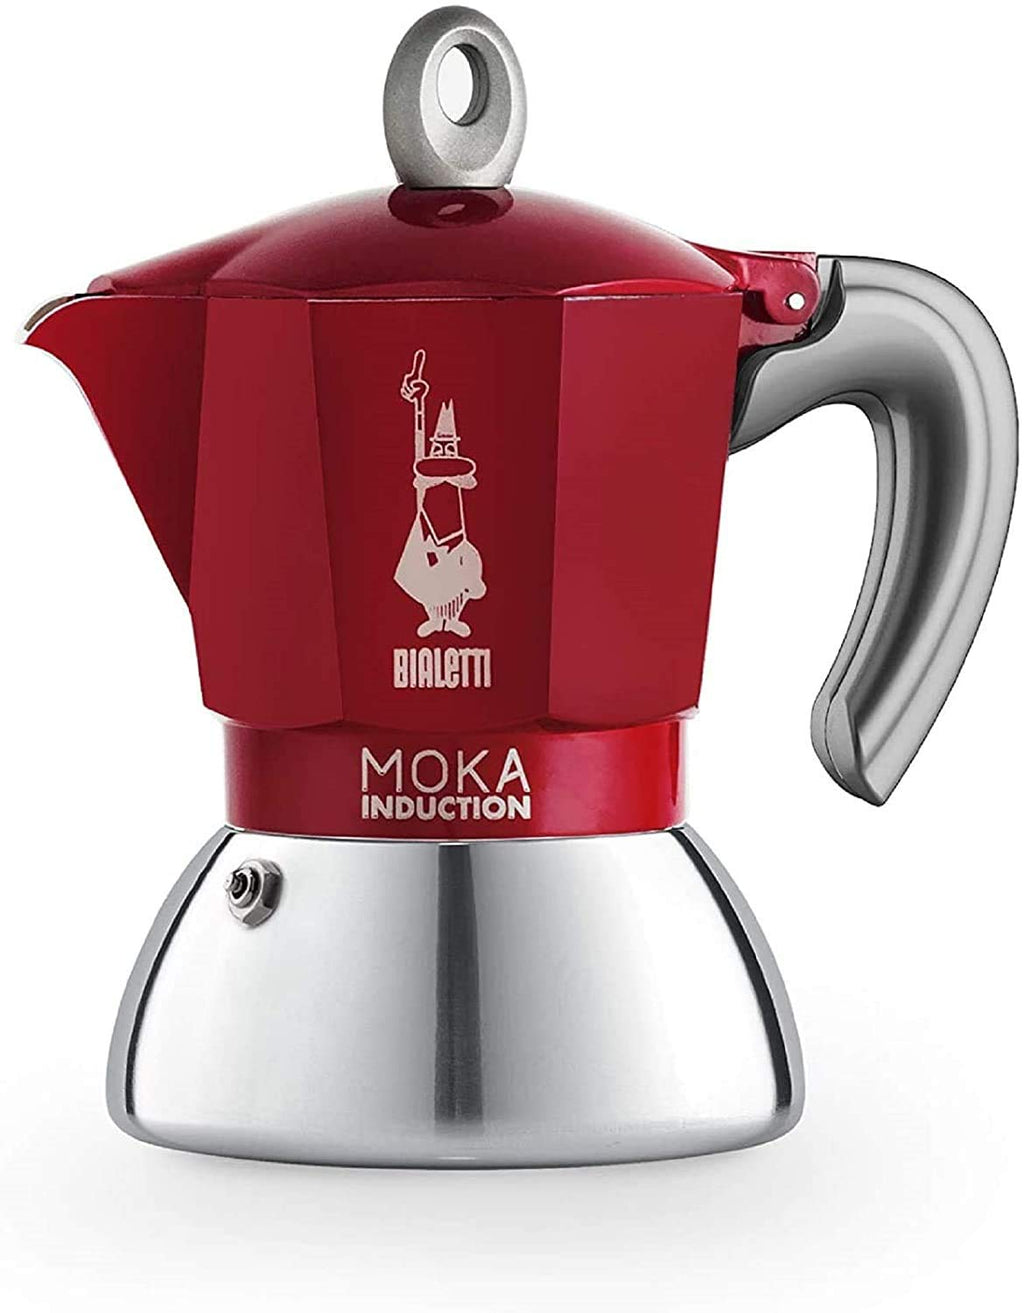 Bialetti New Moka Induction Red 6 Cups